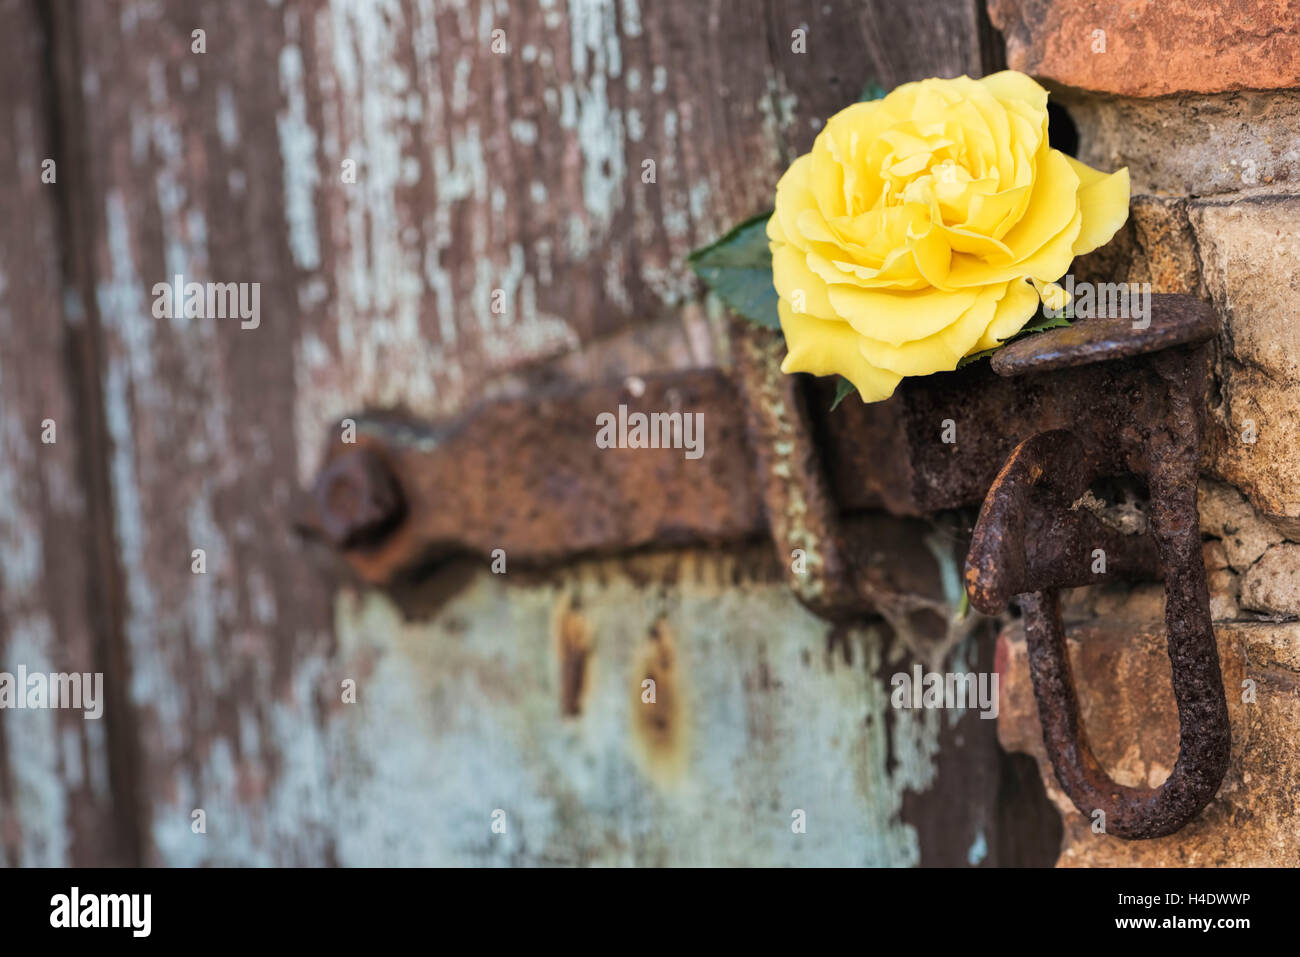 gentle yellow rose in the old lock and old door, Stock Photo